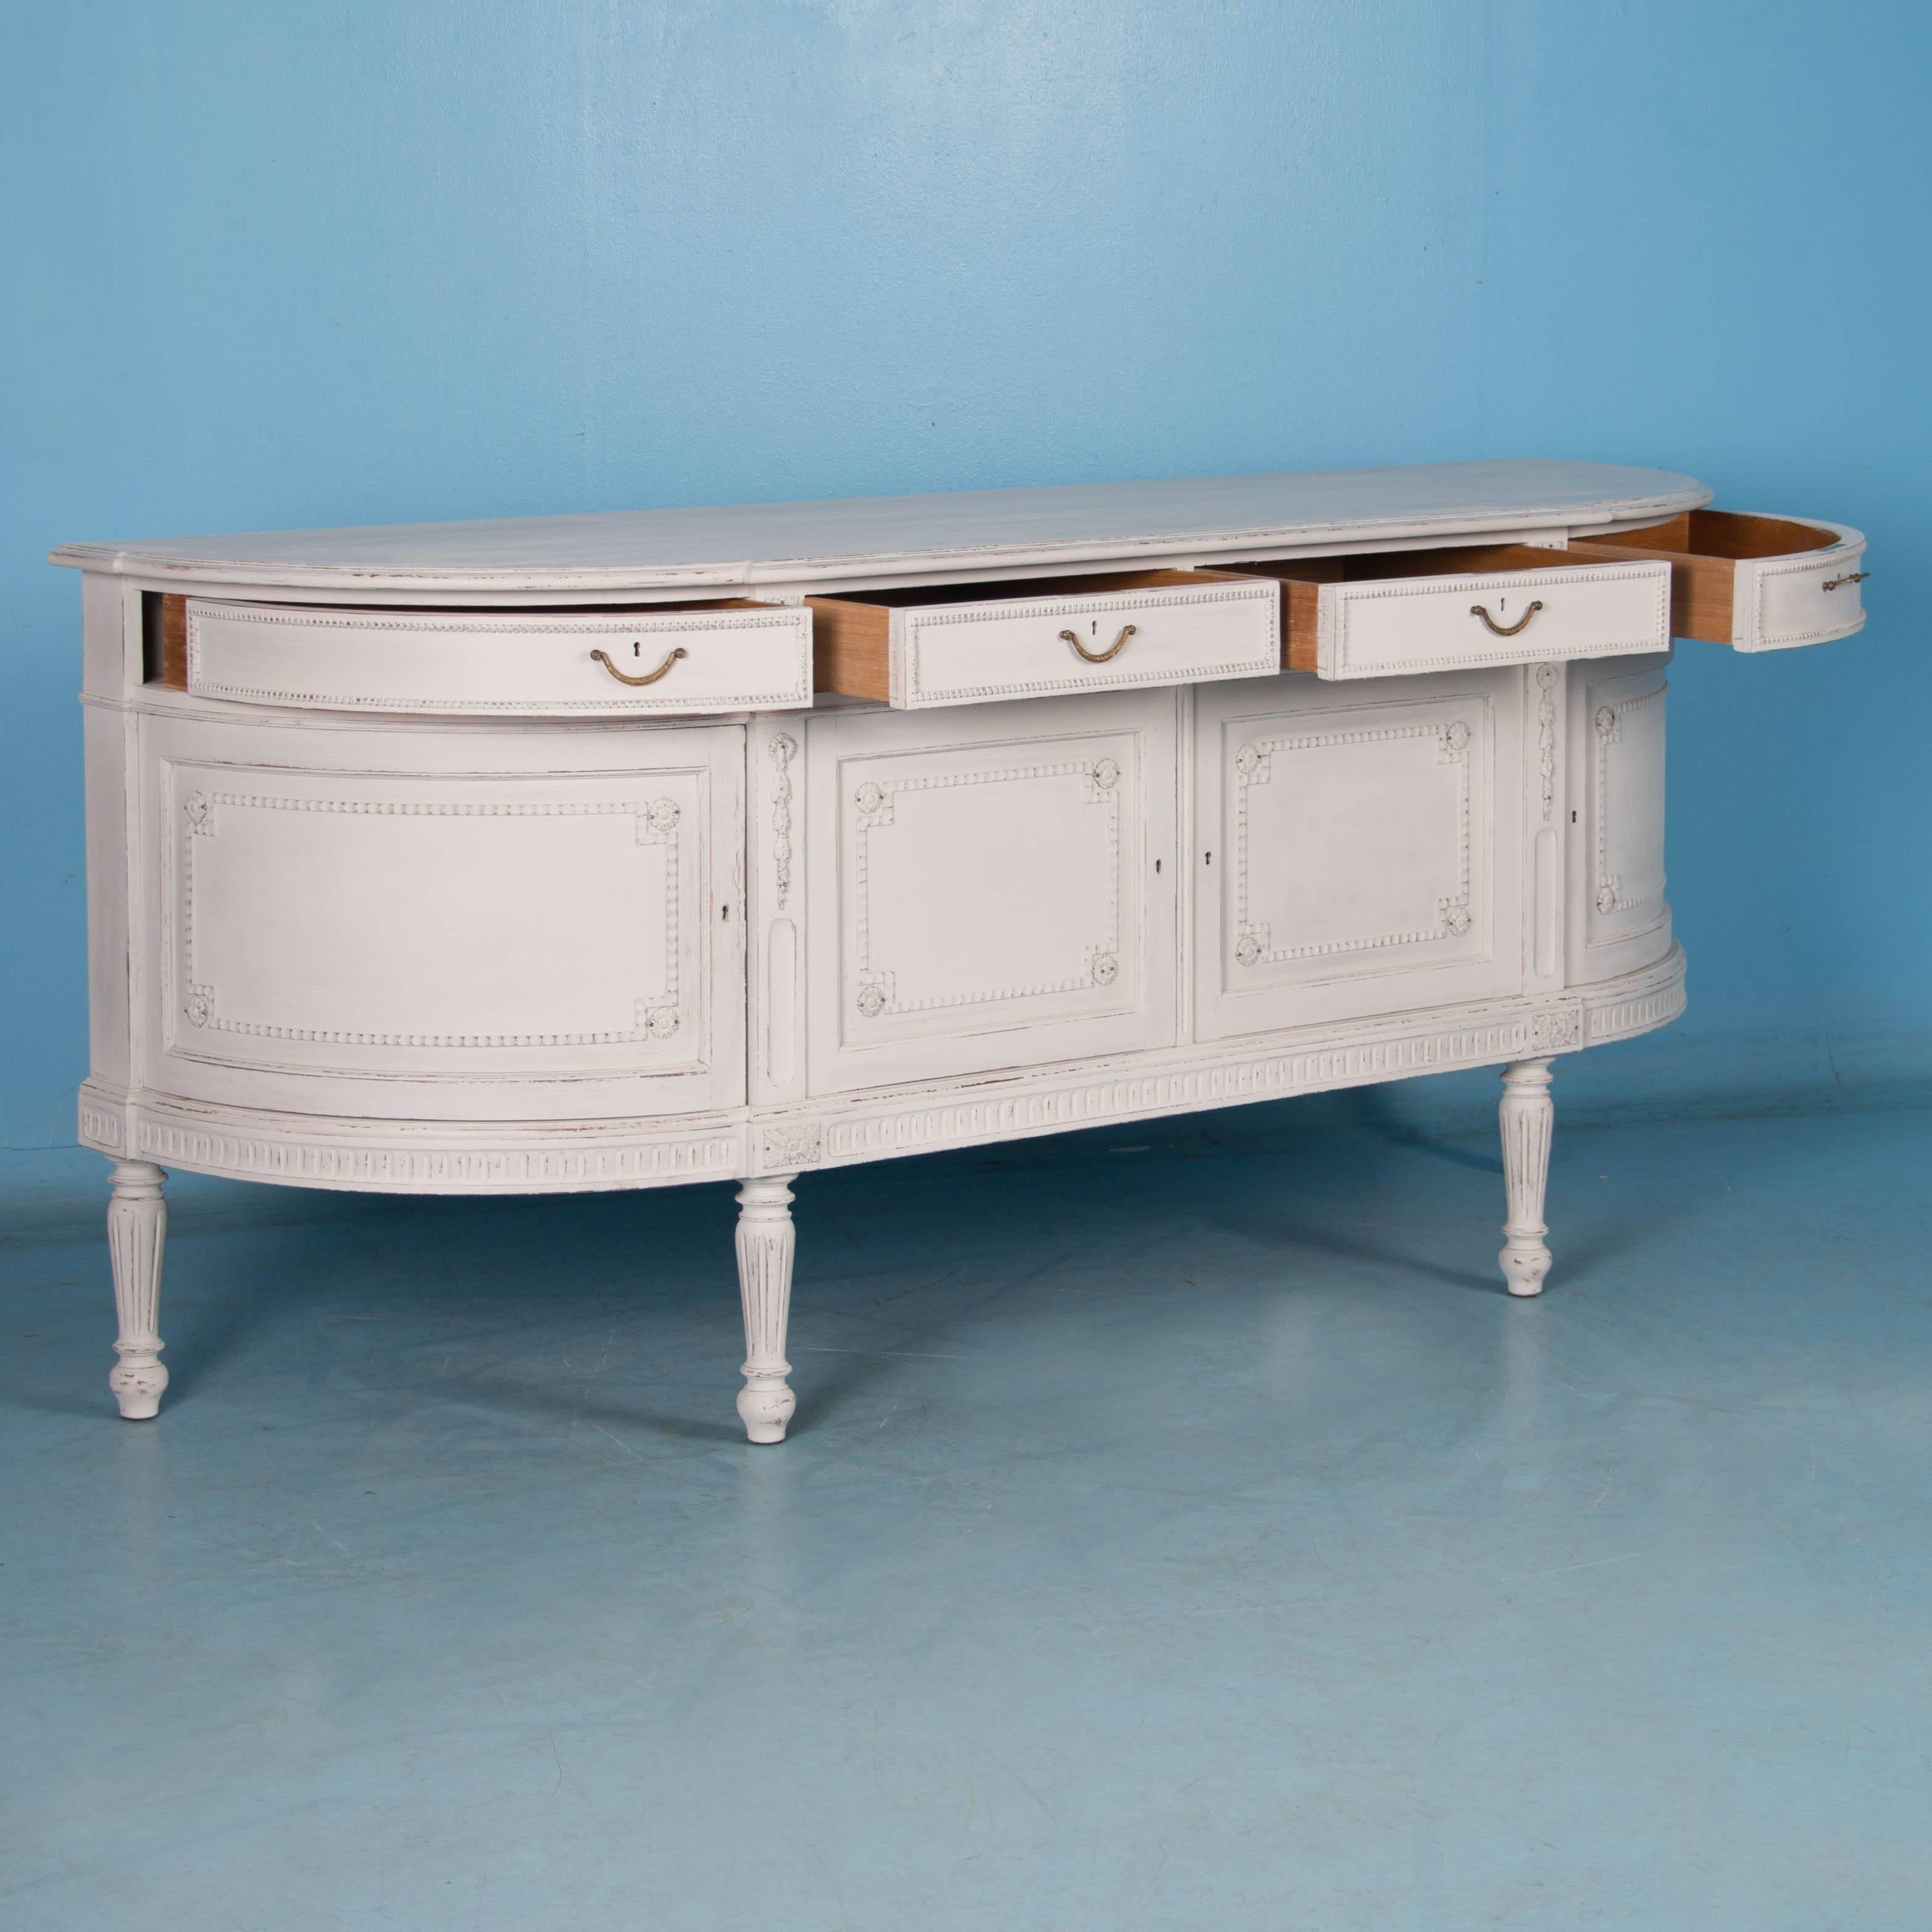 The wonderful proportions are enhanced by the distressed white chalk paint finish on this elegant Gustavian style sideboard from Sweden. The new white paint has been lightly scraped exposing the natural wood beneath and highlighting the applied